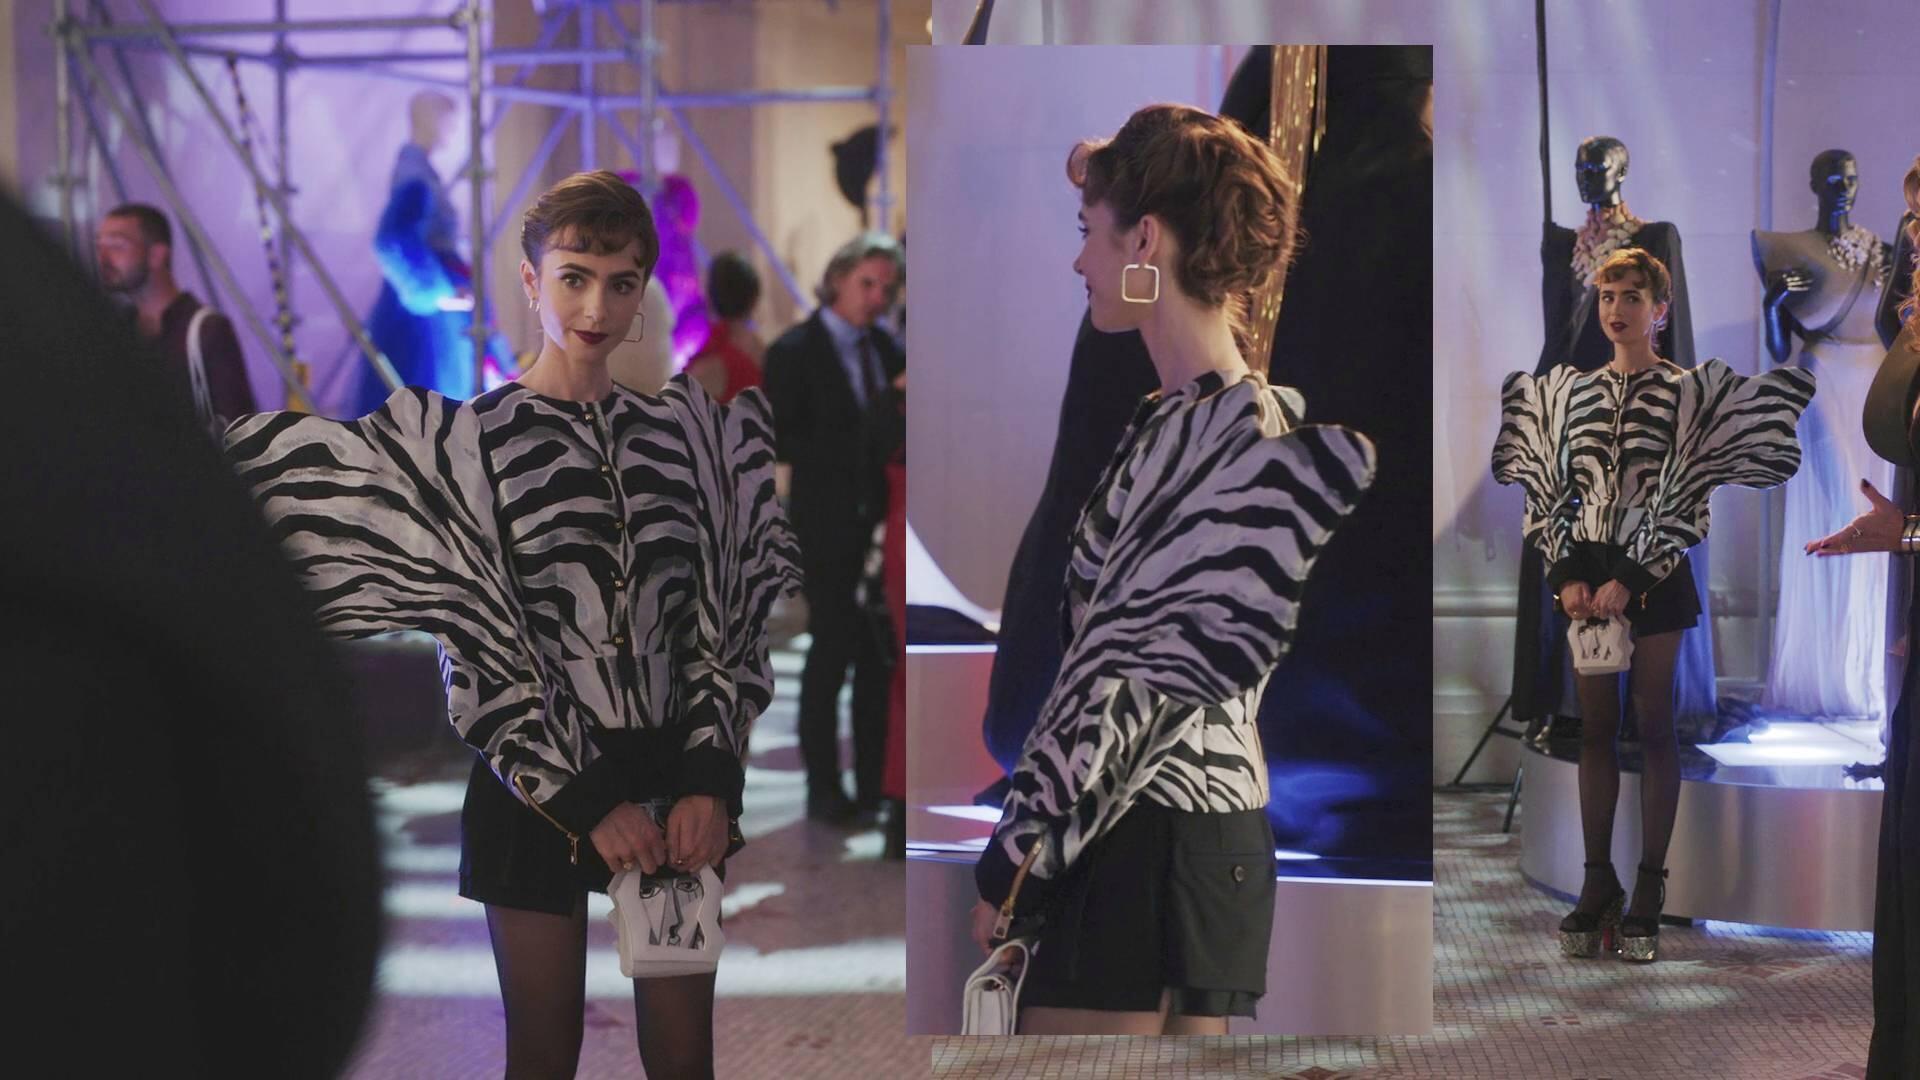 Lily Collins - Emily in Paris | Season 3 Episode 2 | Lily Collins style